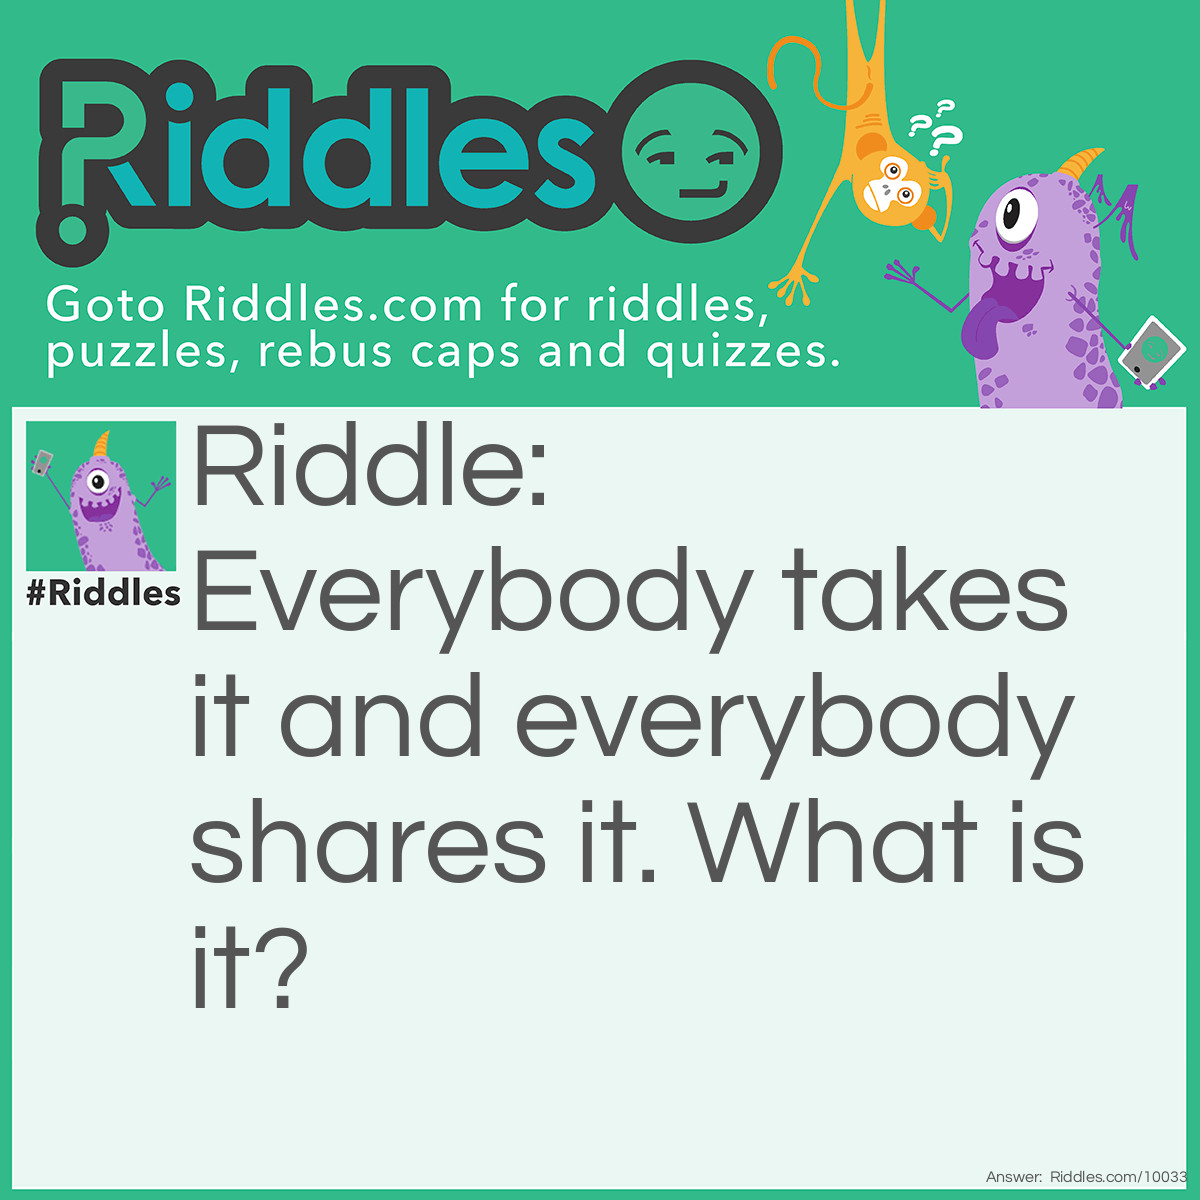 Riddle: Everybody takes it and everybody shares it. What is it? Answer: Air.